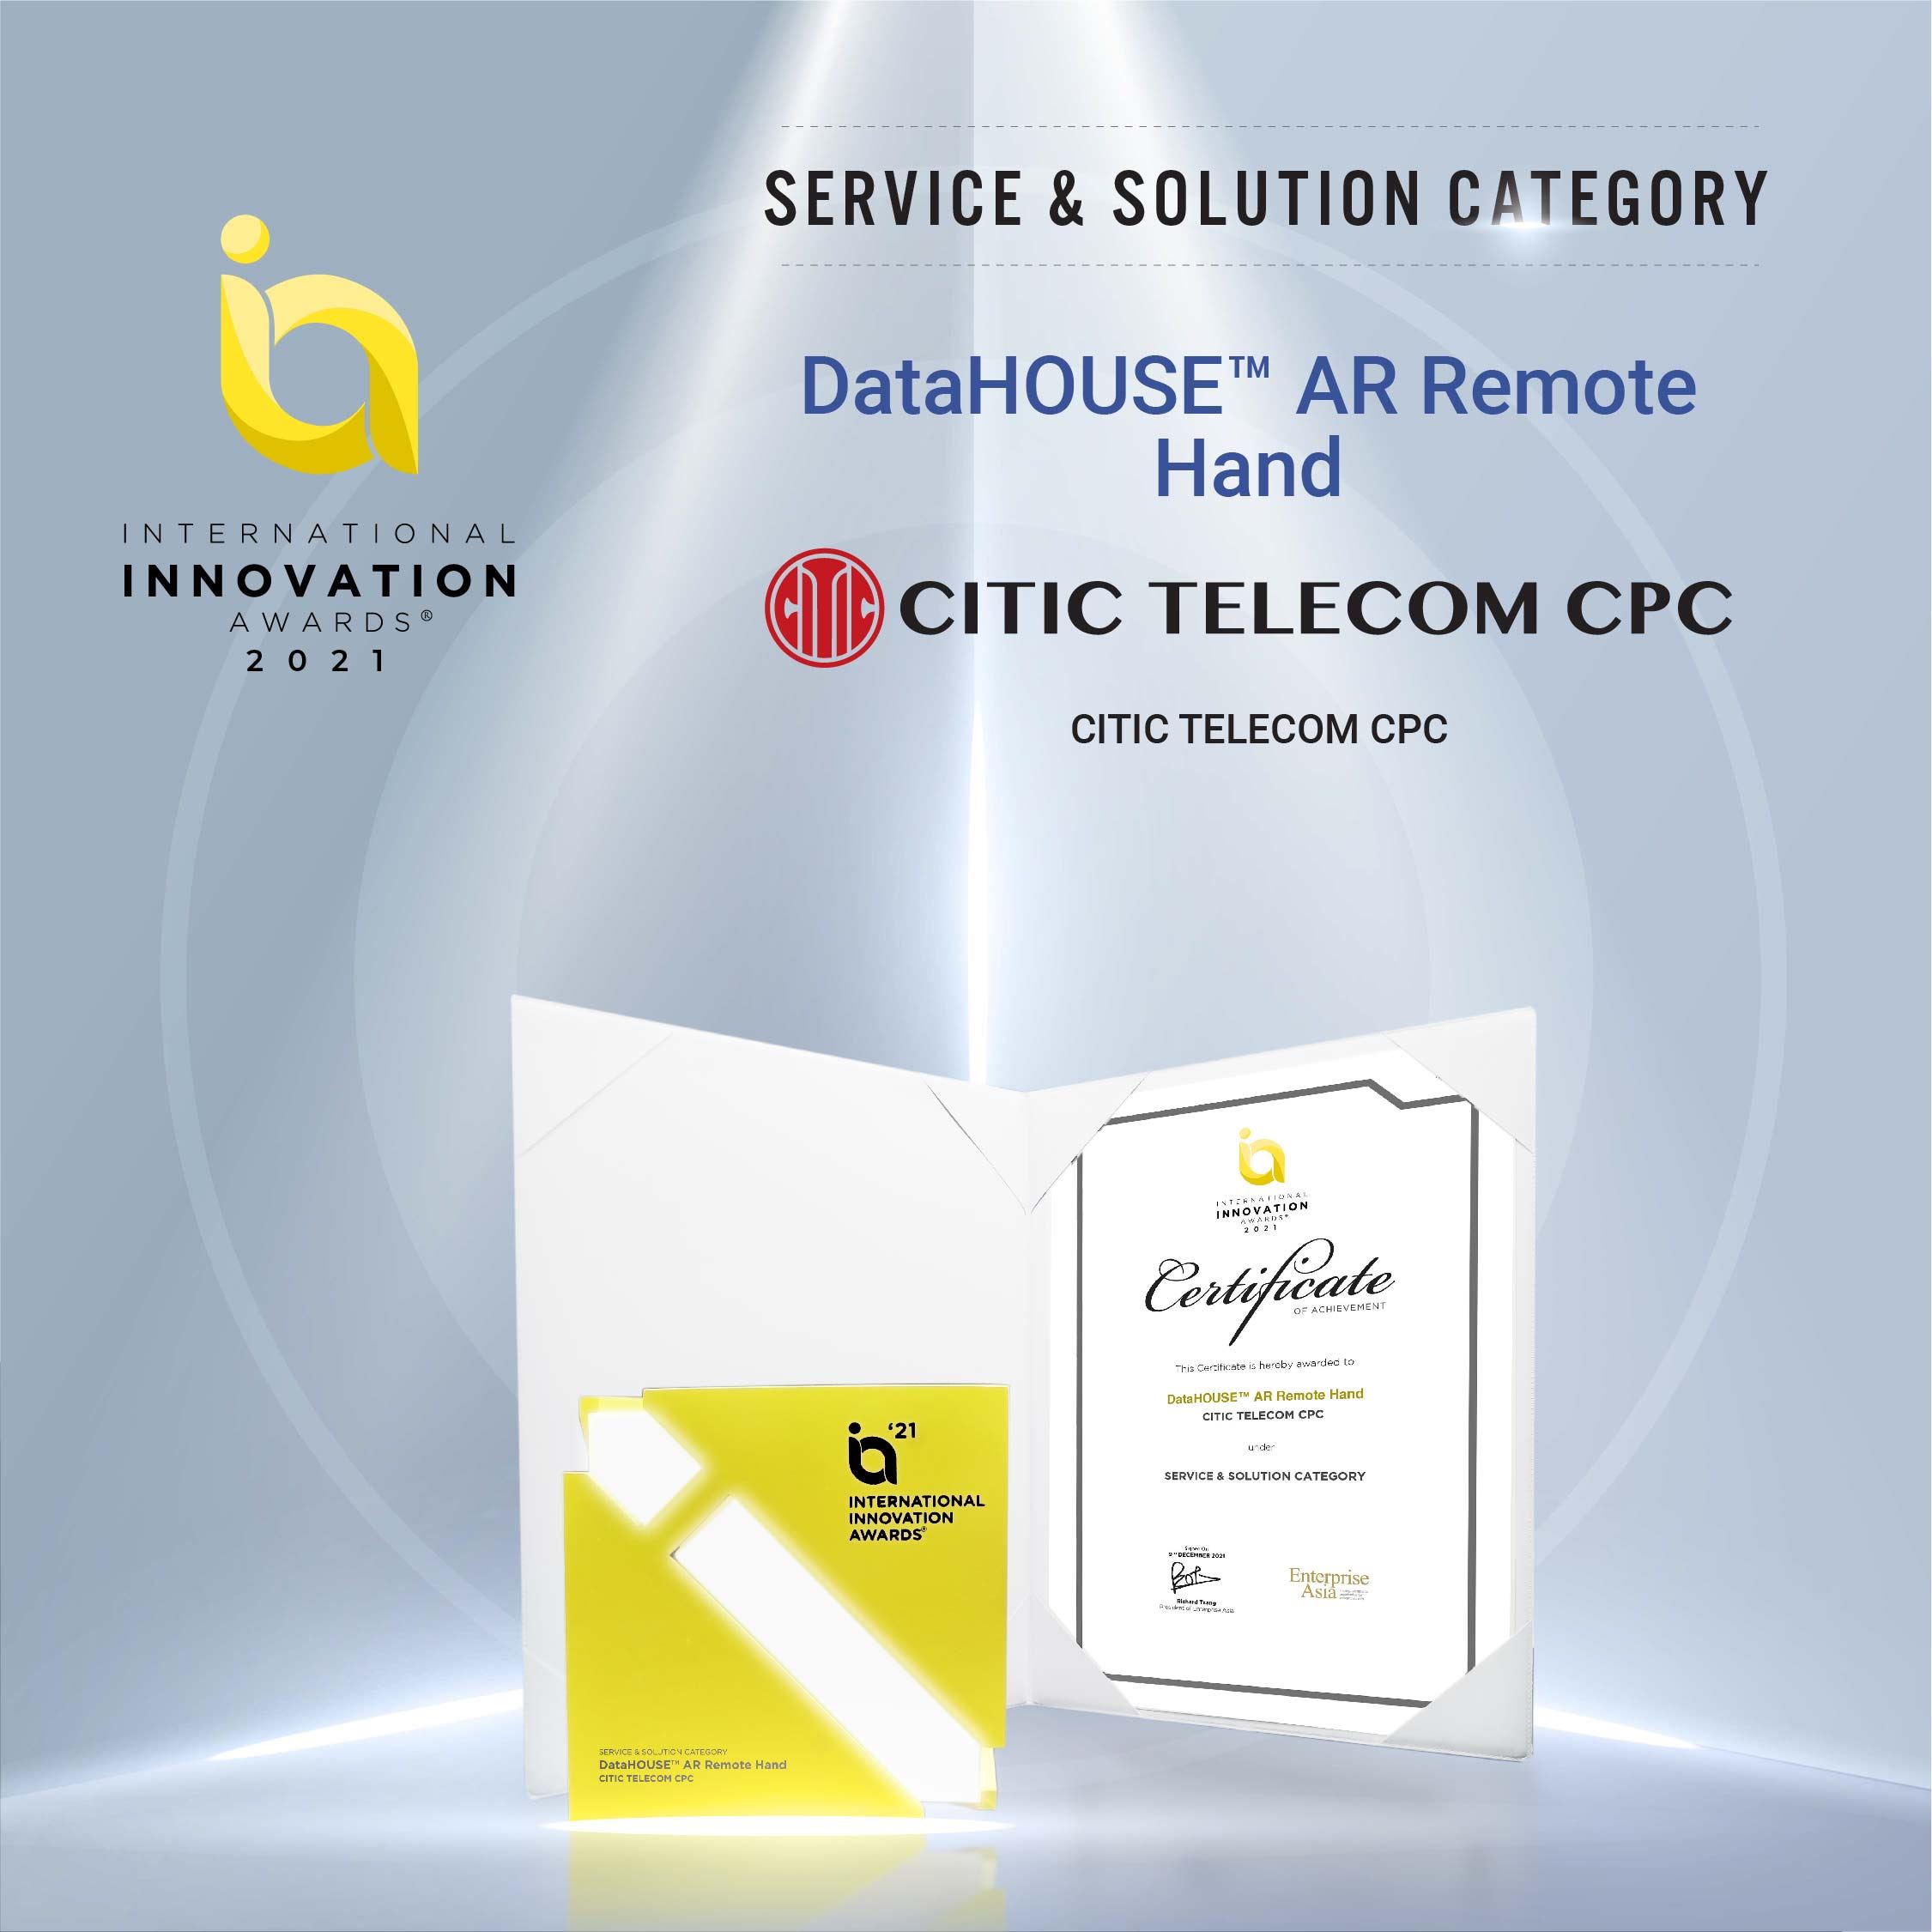 CITIC Telecom CPC wins 3 Industry Awards in Recognition of Innovation Excellence empowering Enterprises via ICT-MiiND Strategy